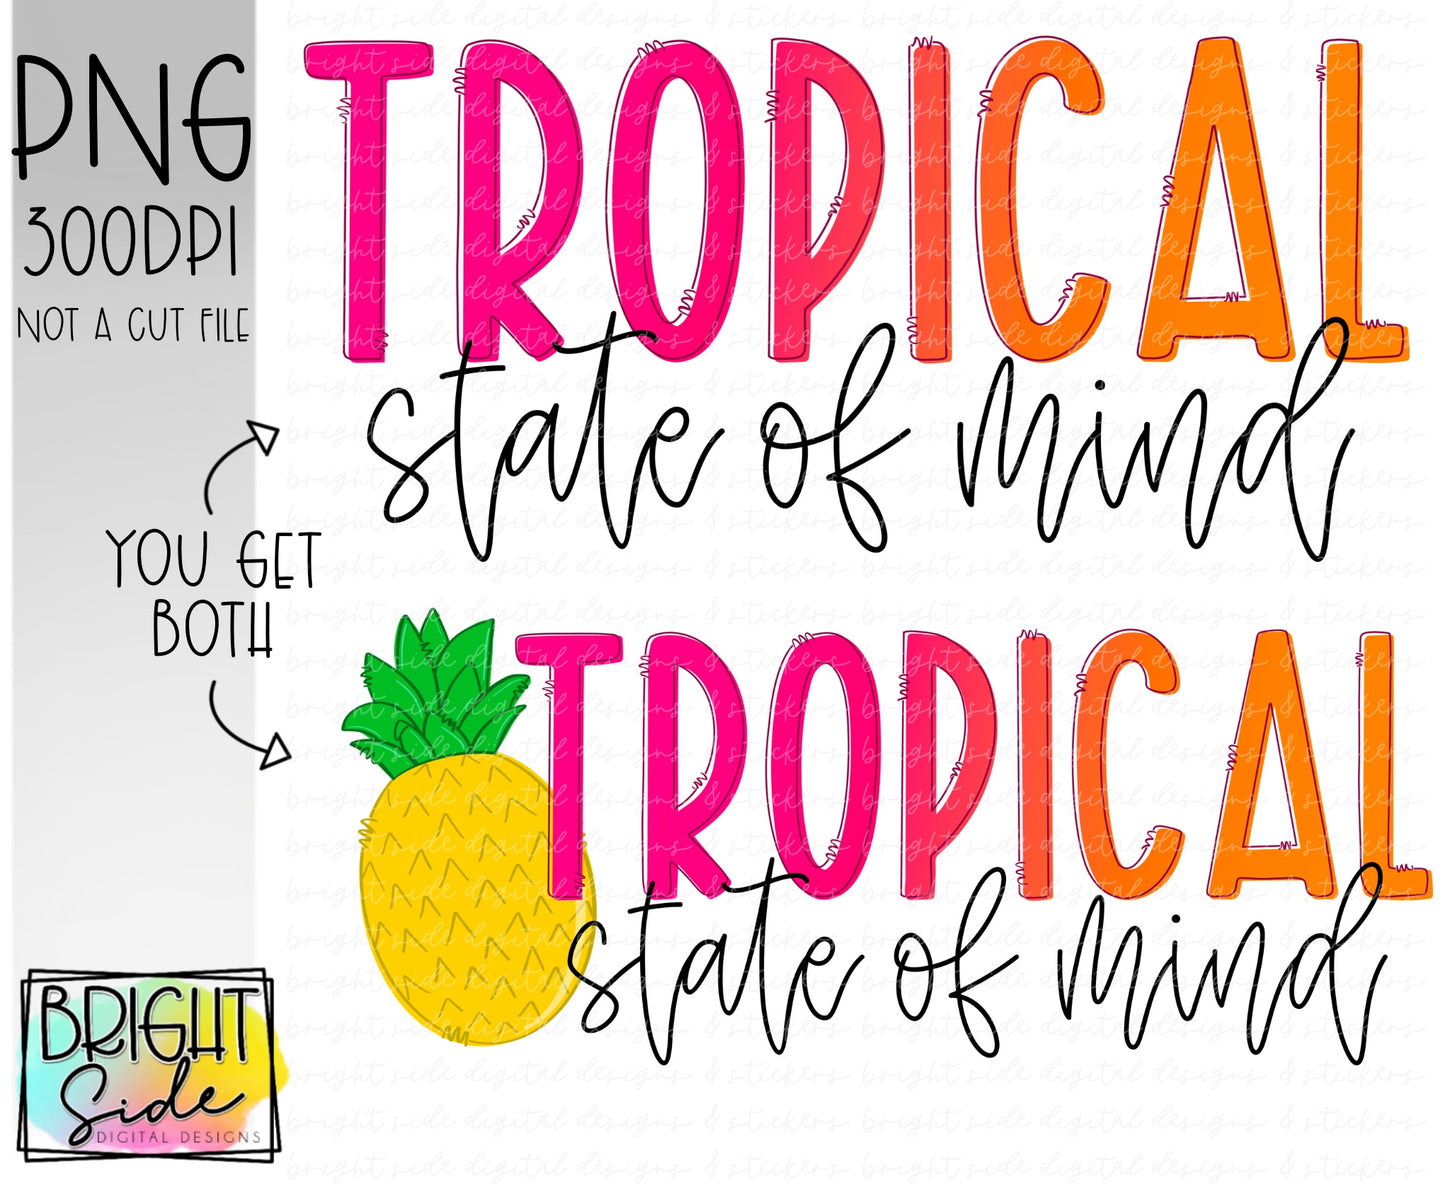 Tropical State of mind